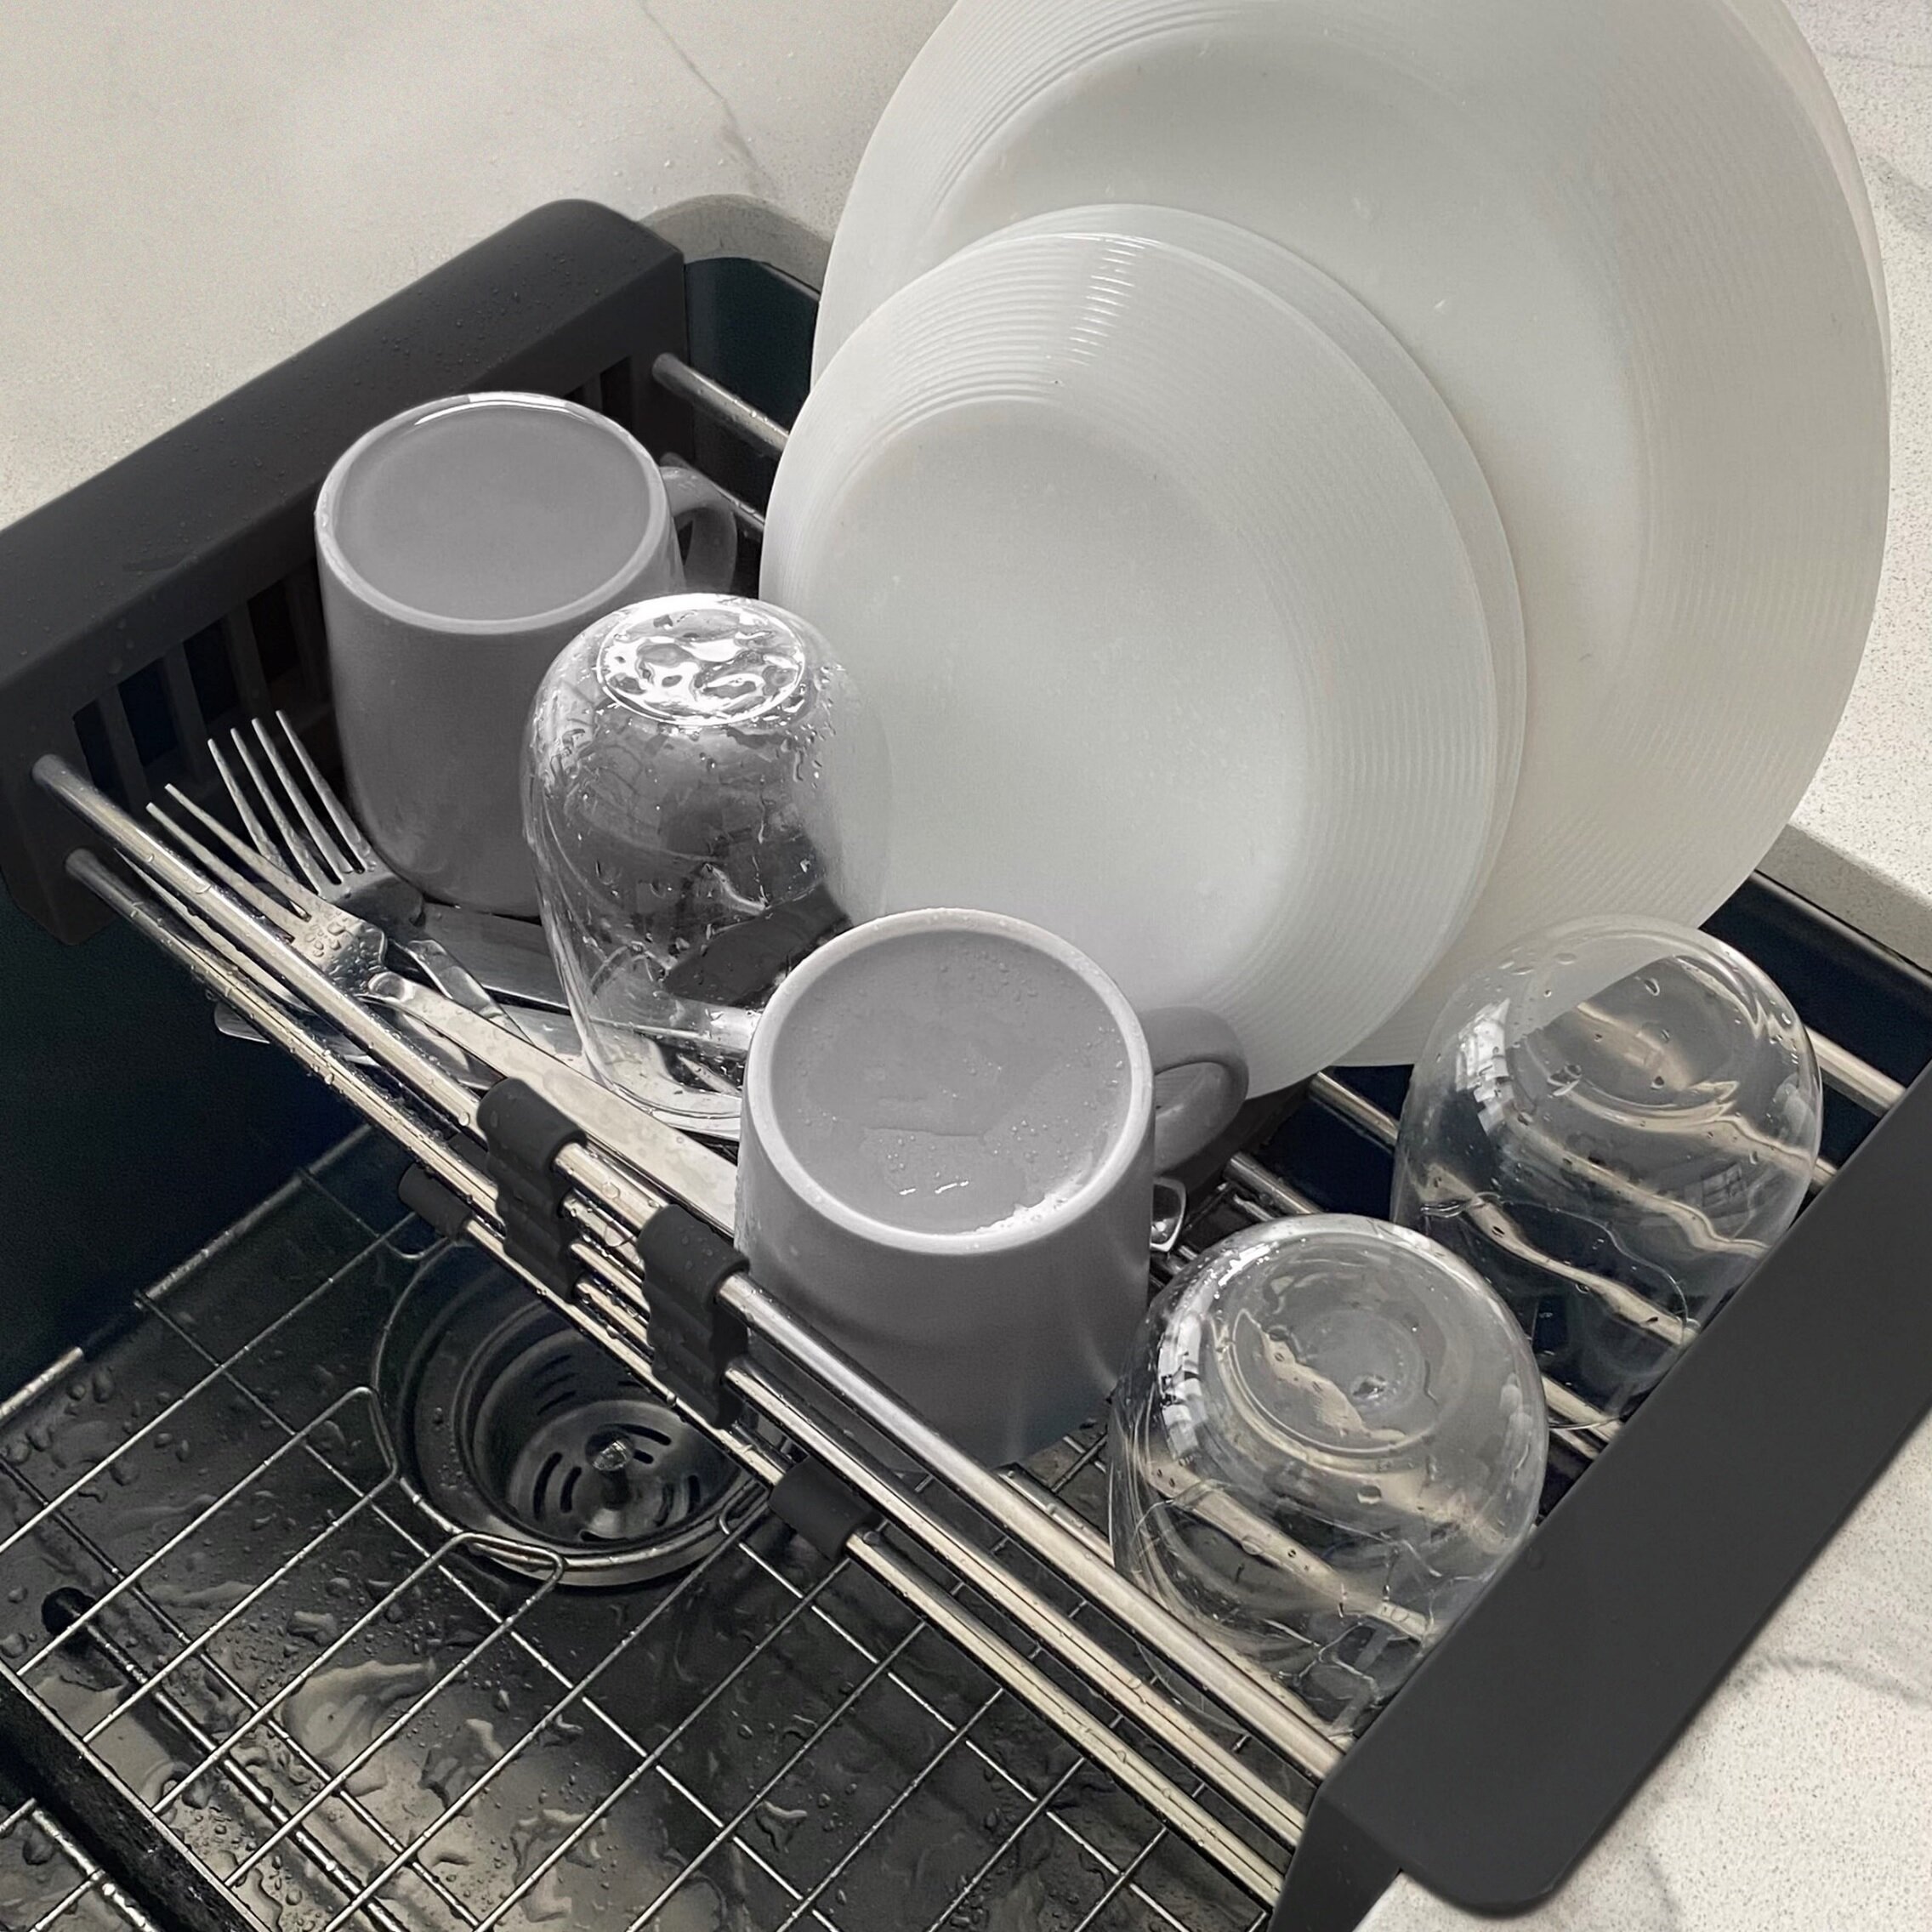 1pc Kitchen Stainless Steel Drain, Fruit Vegetable Wash Basin, Stretchable  Versatile Drying Container, Dish Rack For